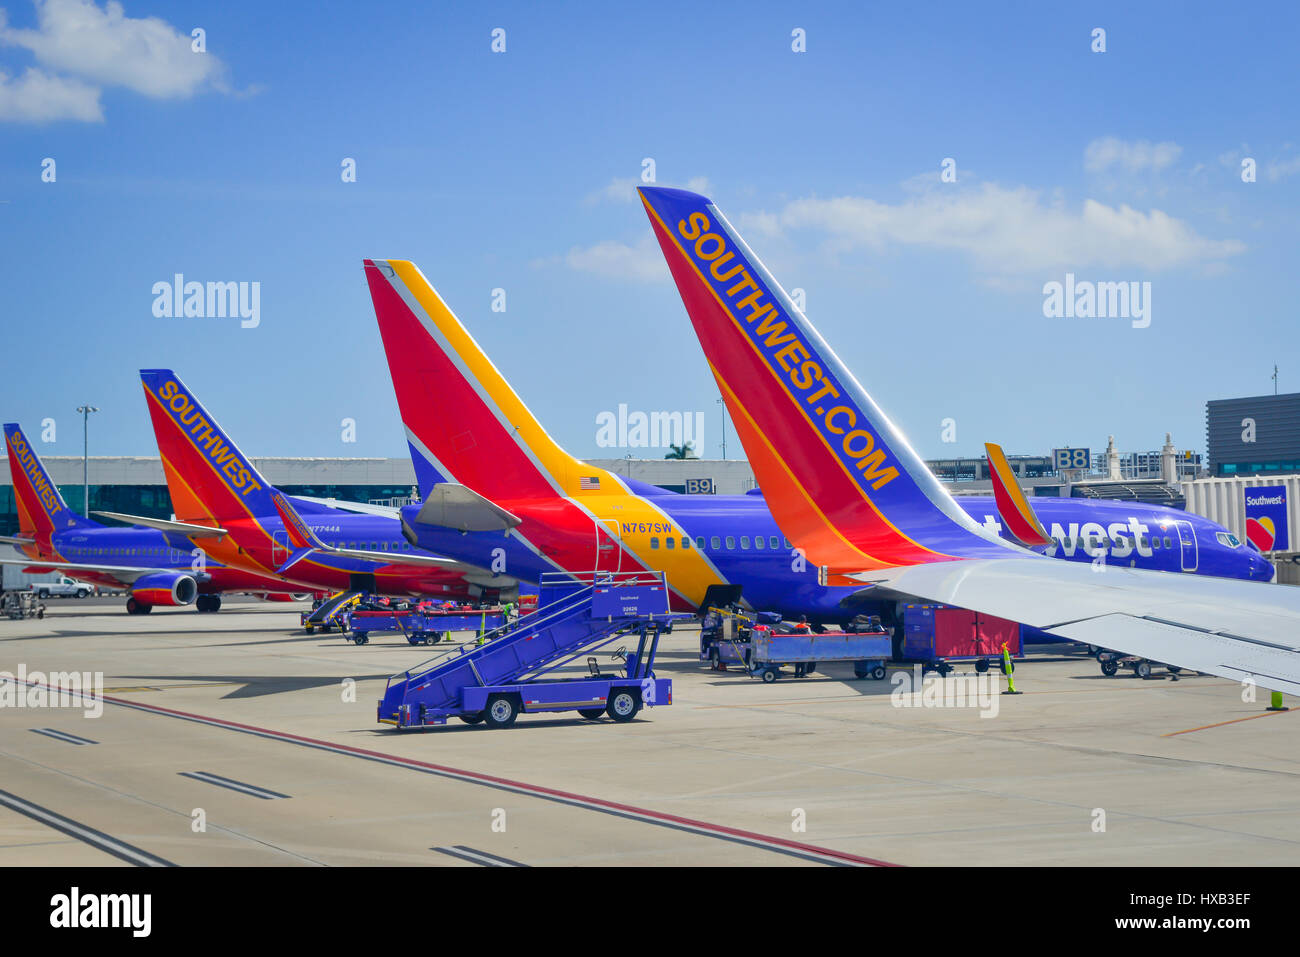 View of parked commerical airplanes at gates being serviced and having luggage loadied in preparation for flight Stock Photo